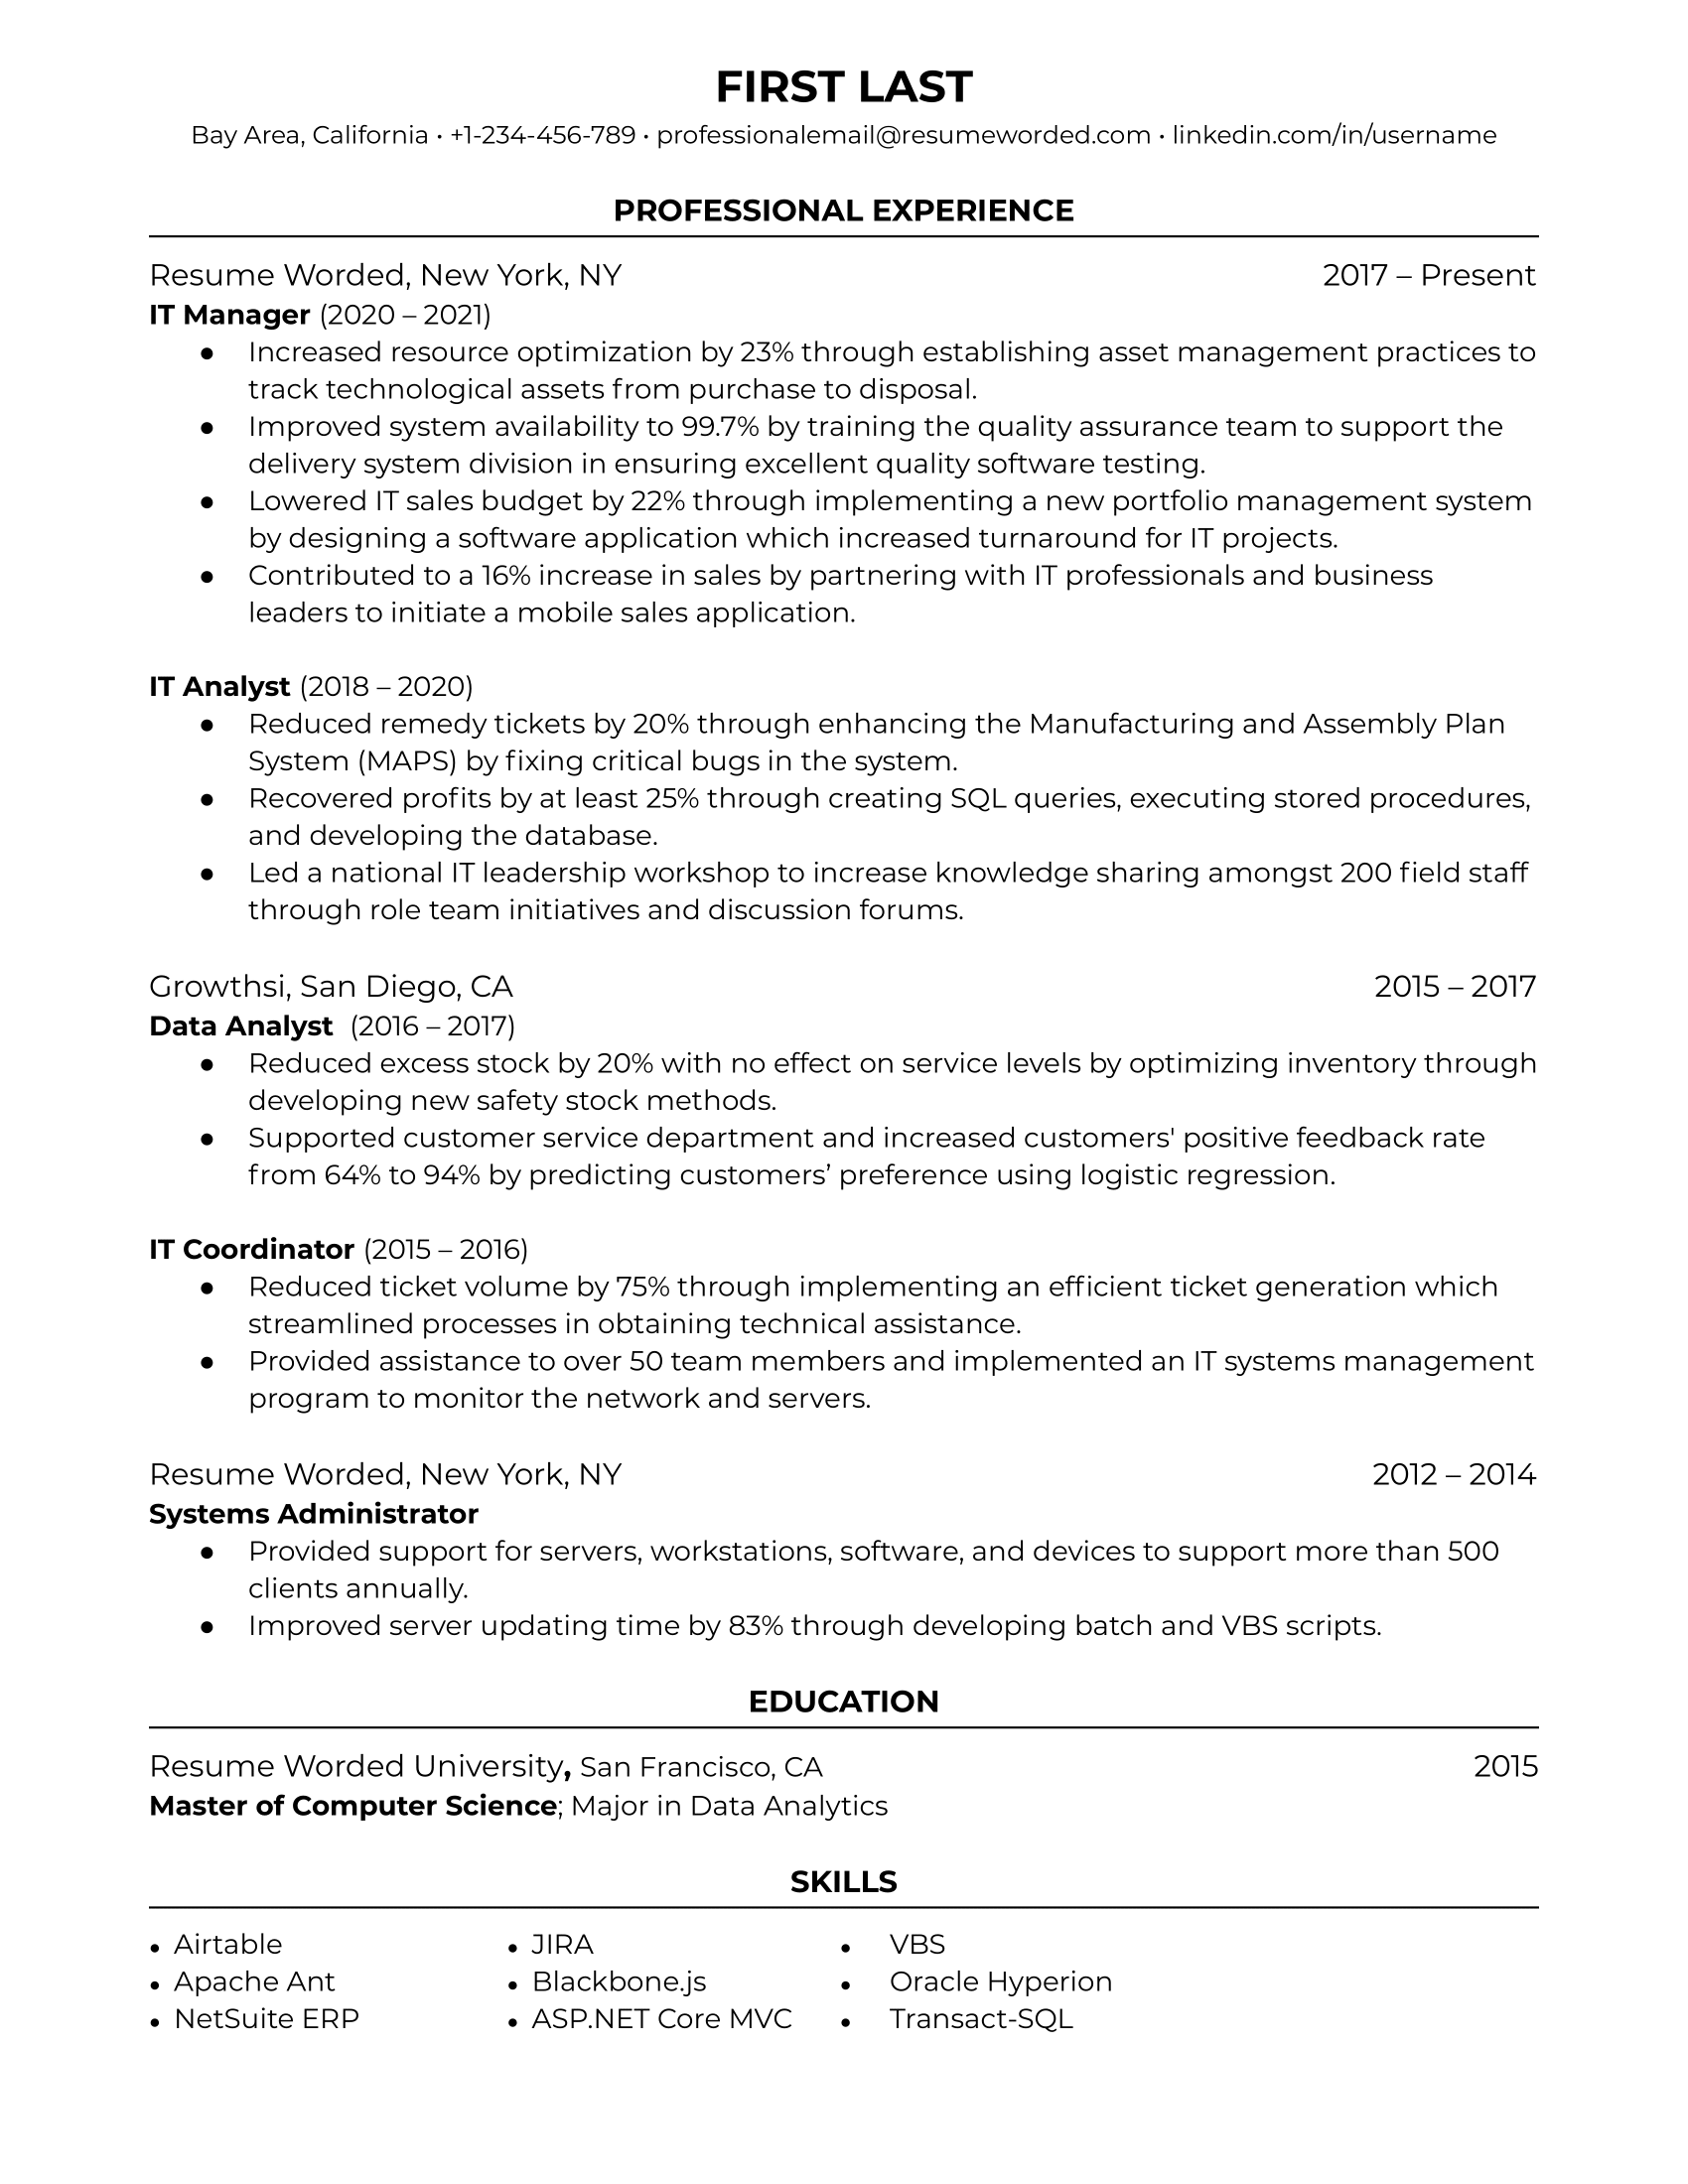 CV for IT Manager role showcasing technical skills and leadership achievements.